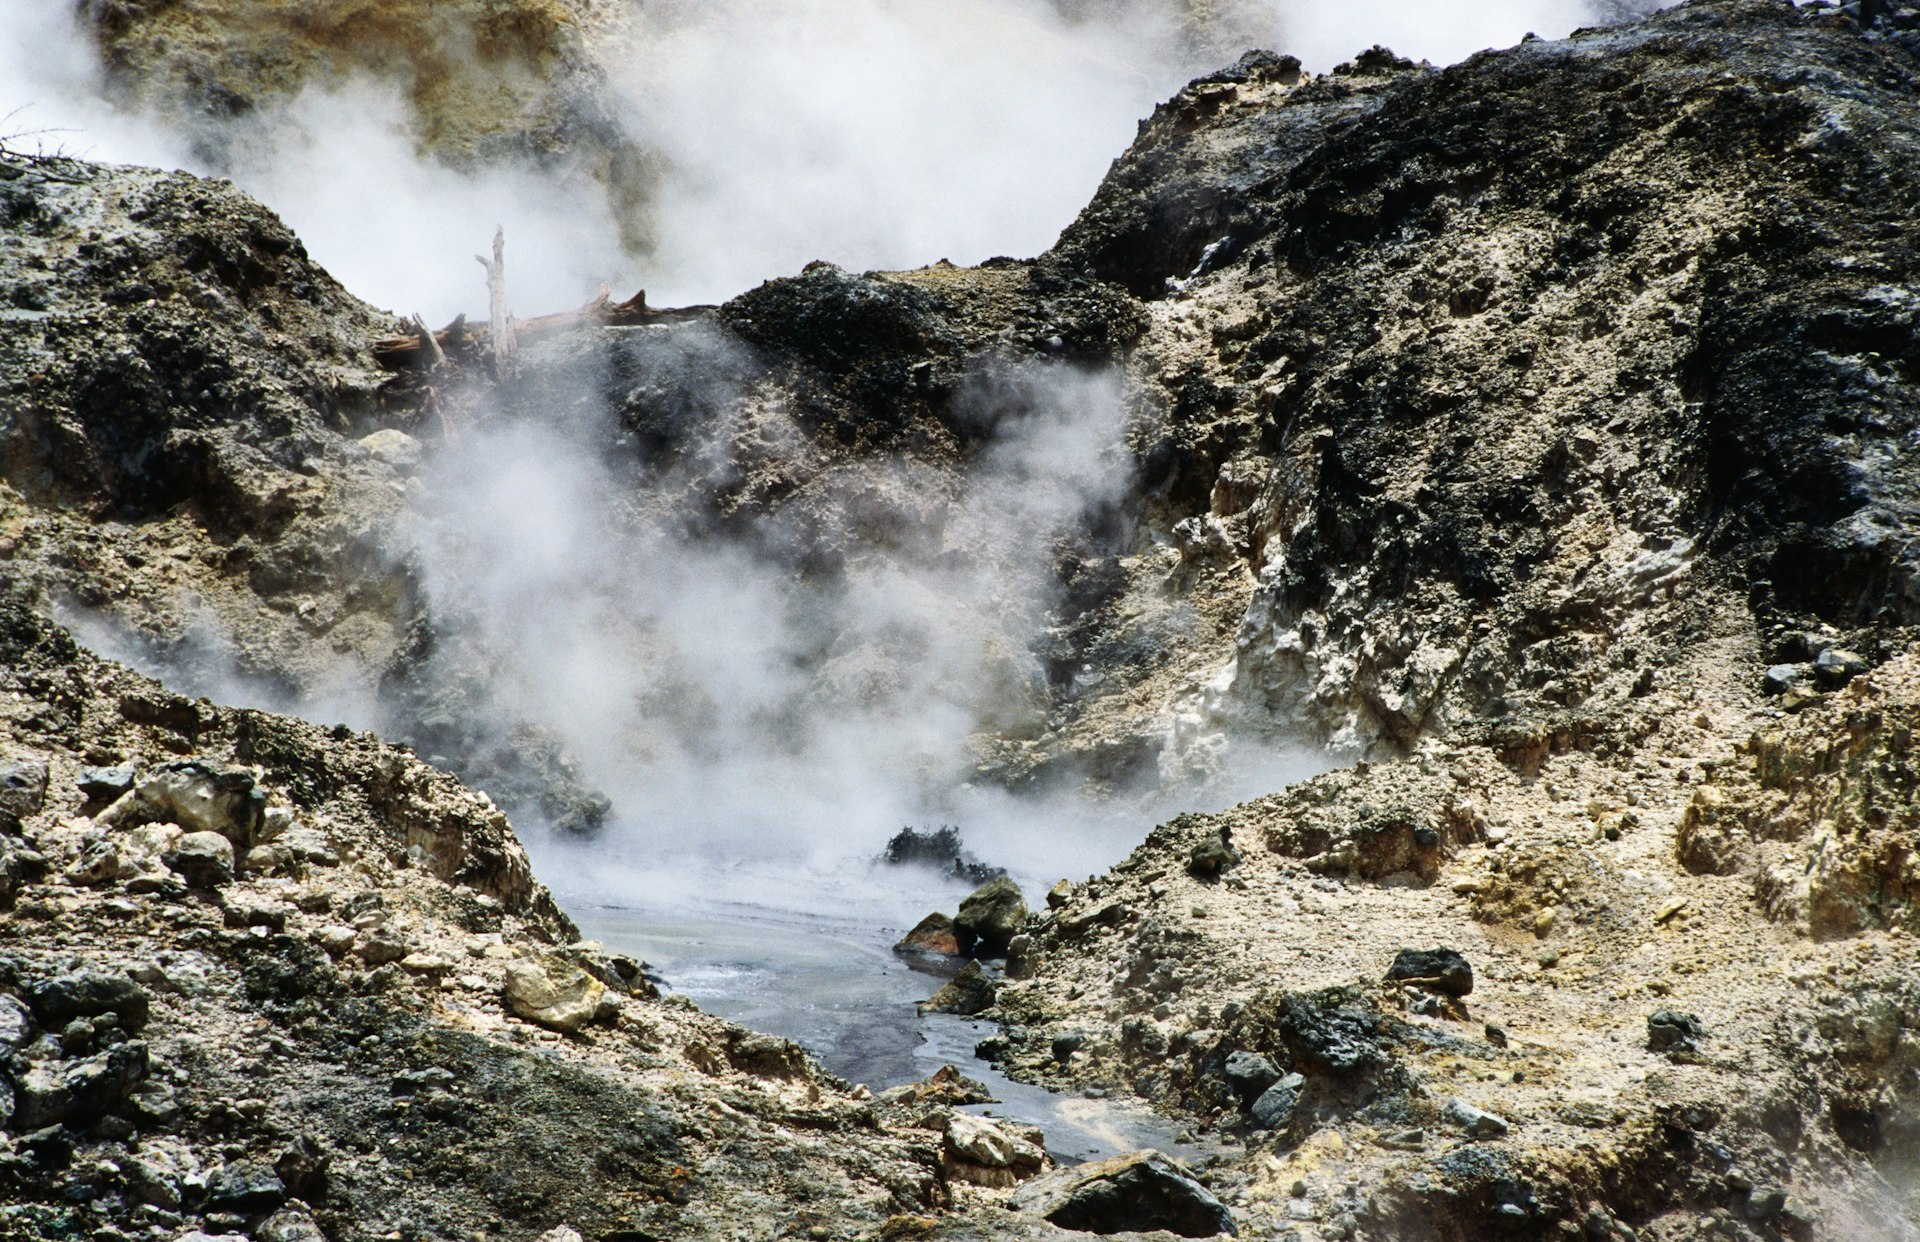 Steam rises from jagged rocks in Soufriere, St Lucia 